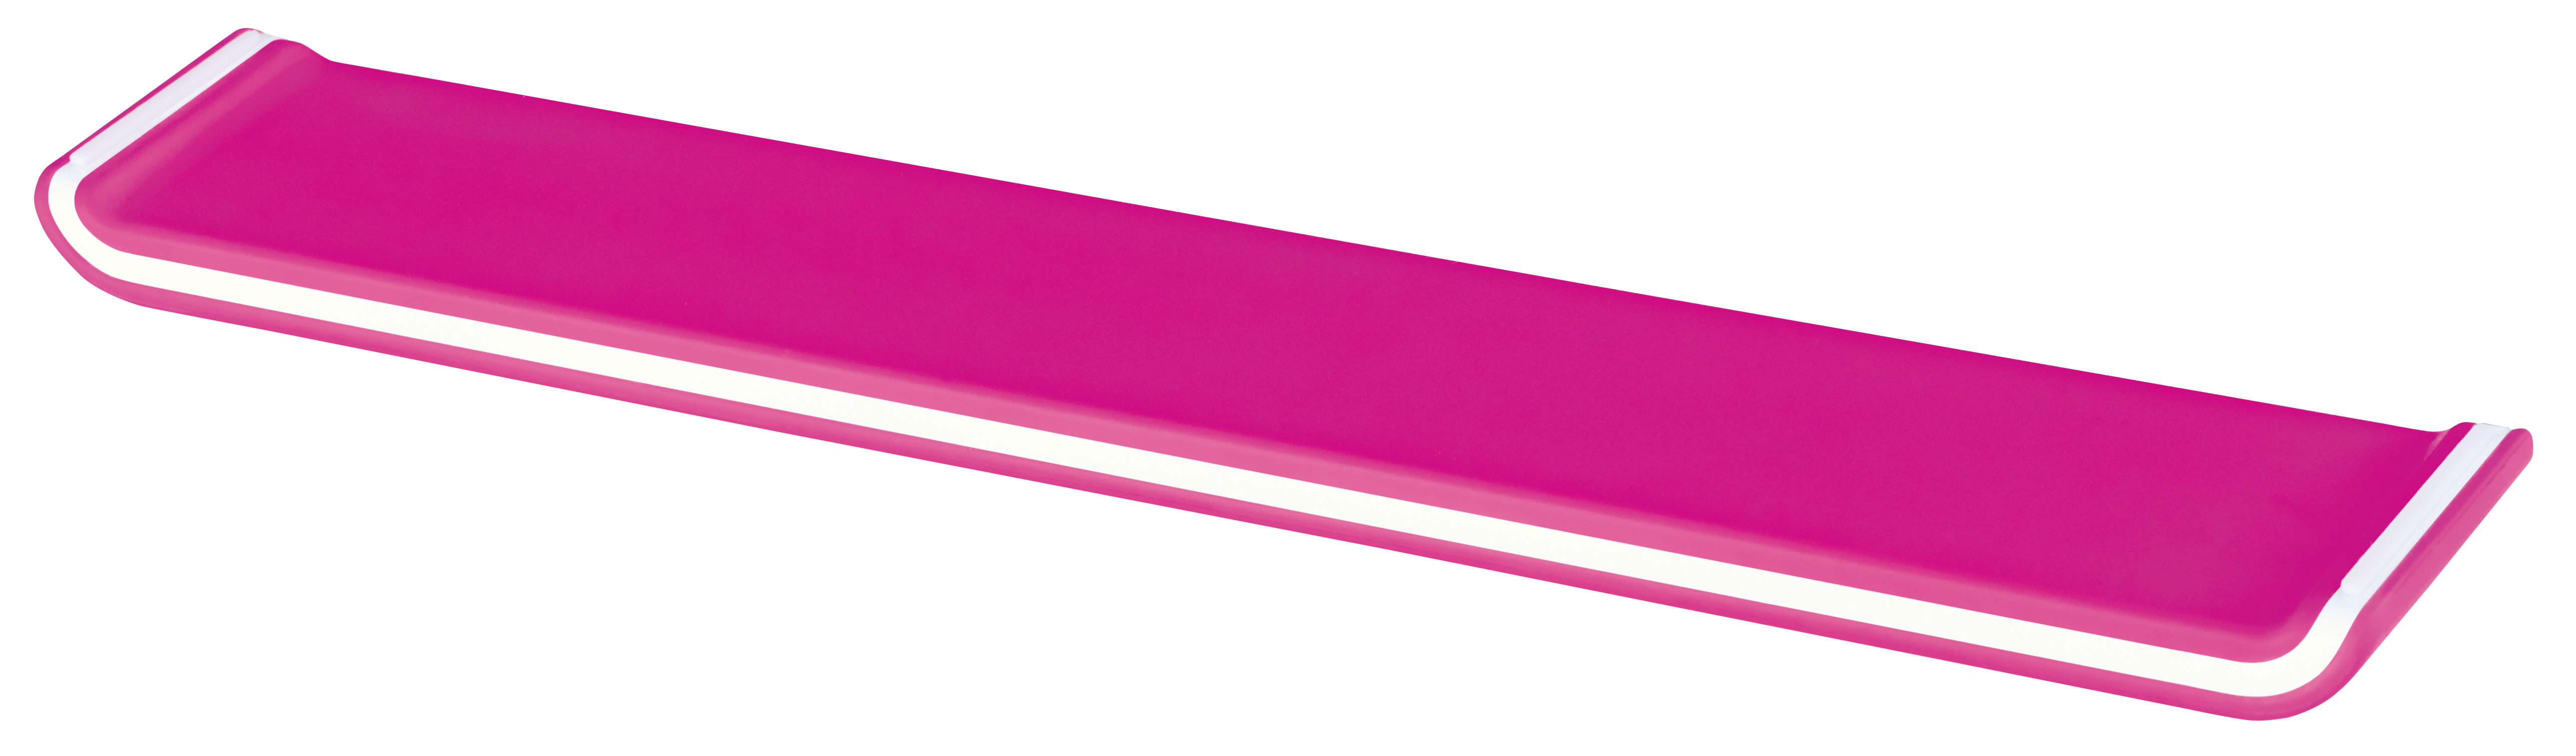 LEITZ Support mains WOW 6523-00-23 blanc/pink